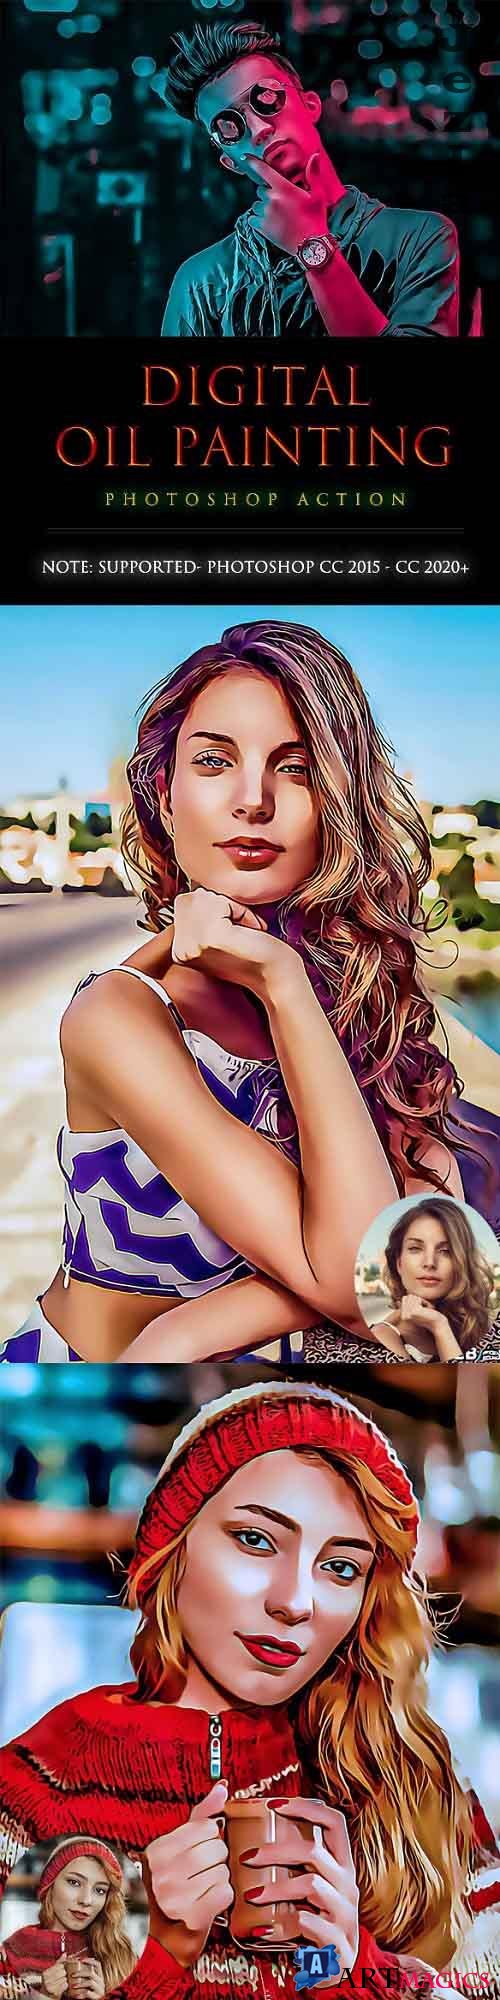 GraphicRiver - Digital OiL painting PhotoShop Action 28368497